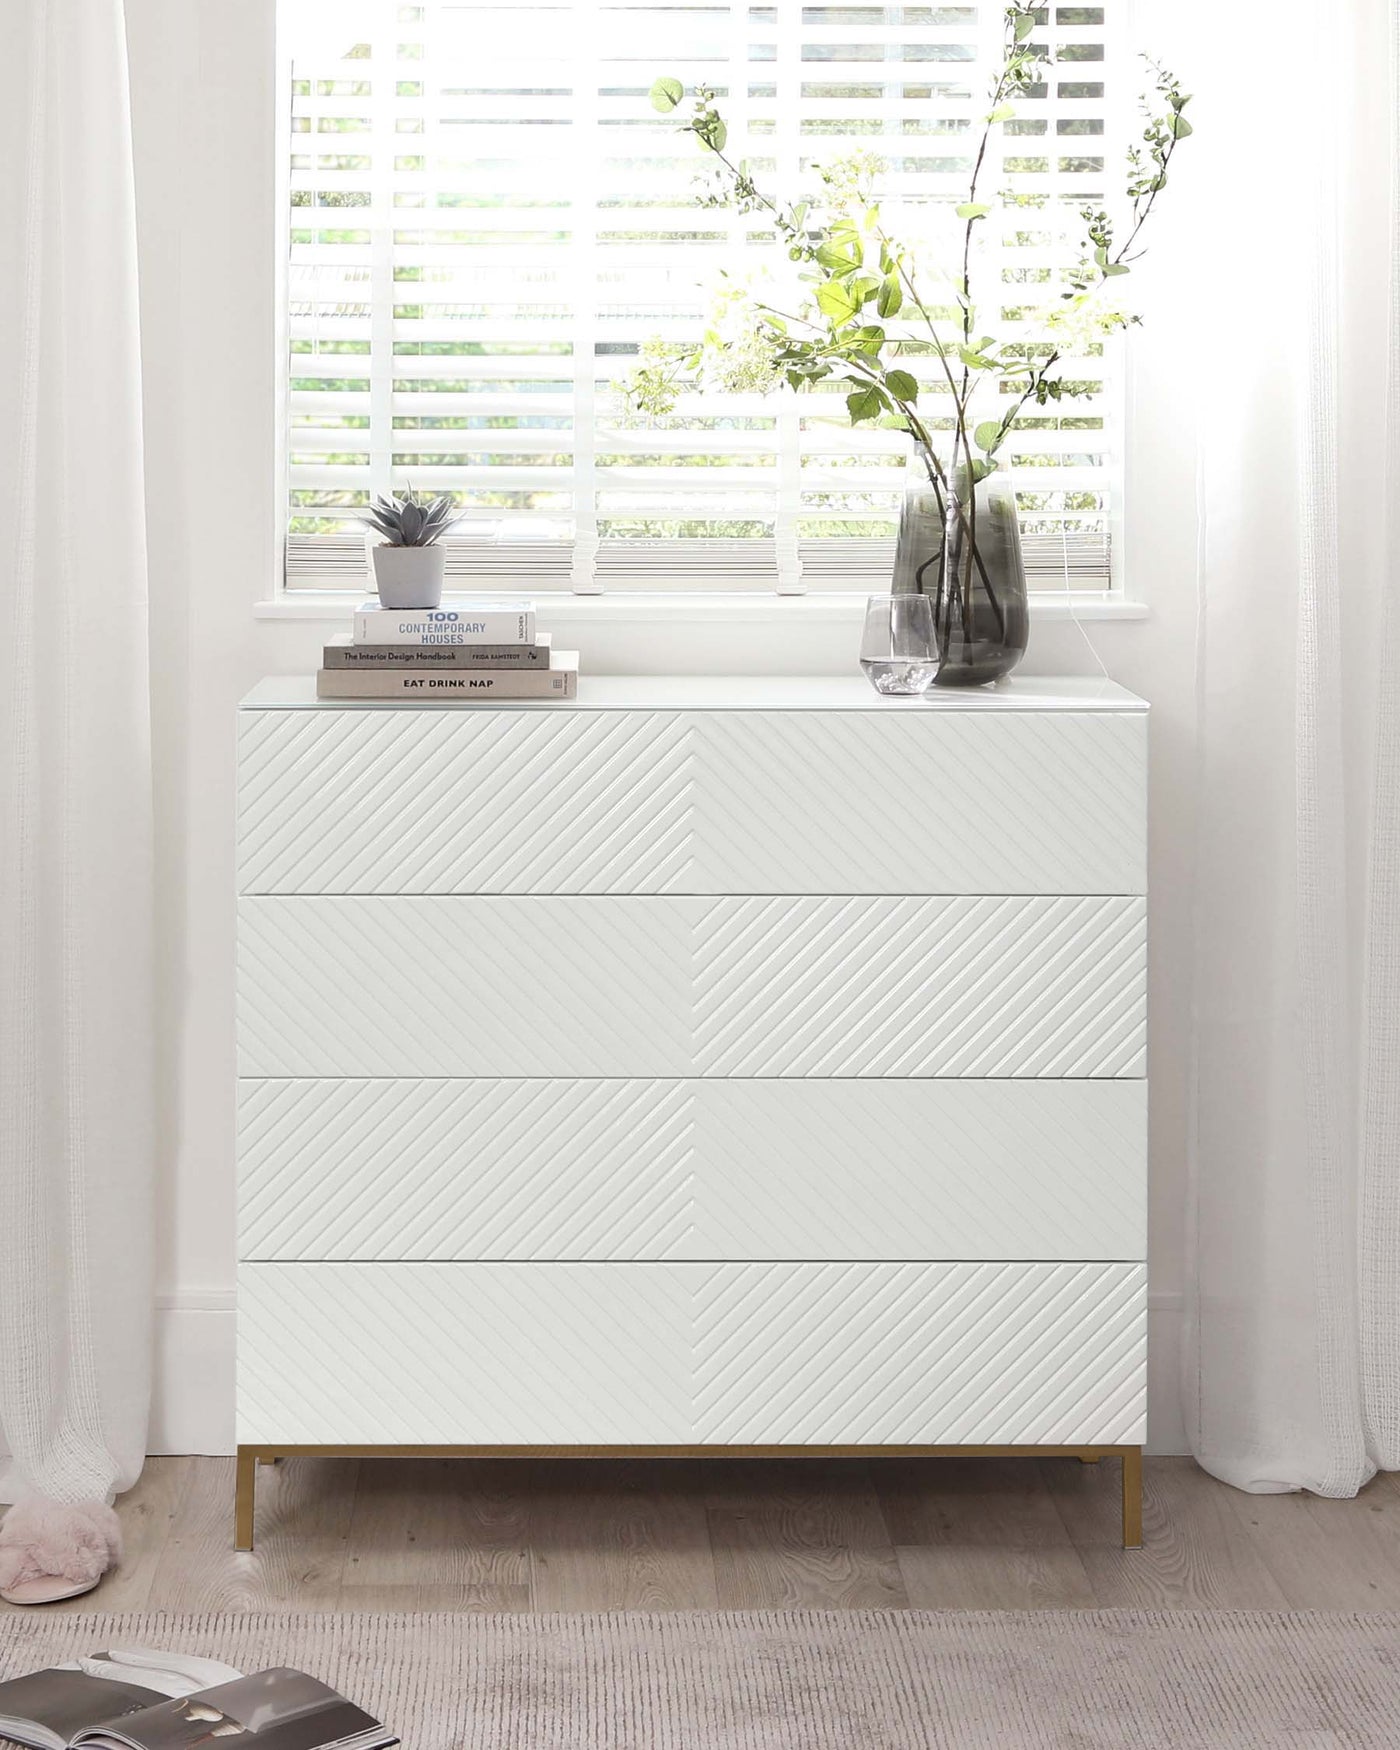 Modern white dresser with a textured front and brass-coloured legs, styled with a clear glass vase containing green branches, a small potted plant, and a stack of books.